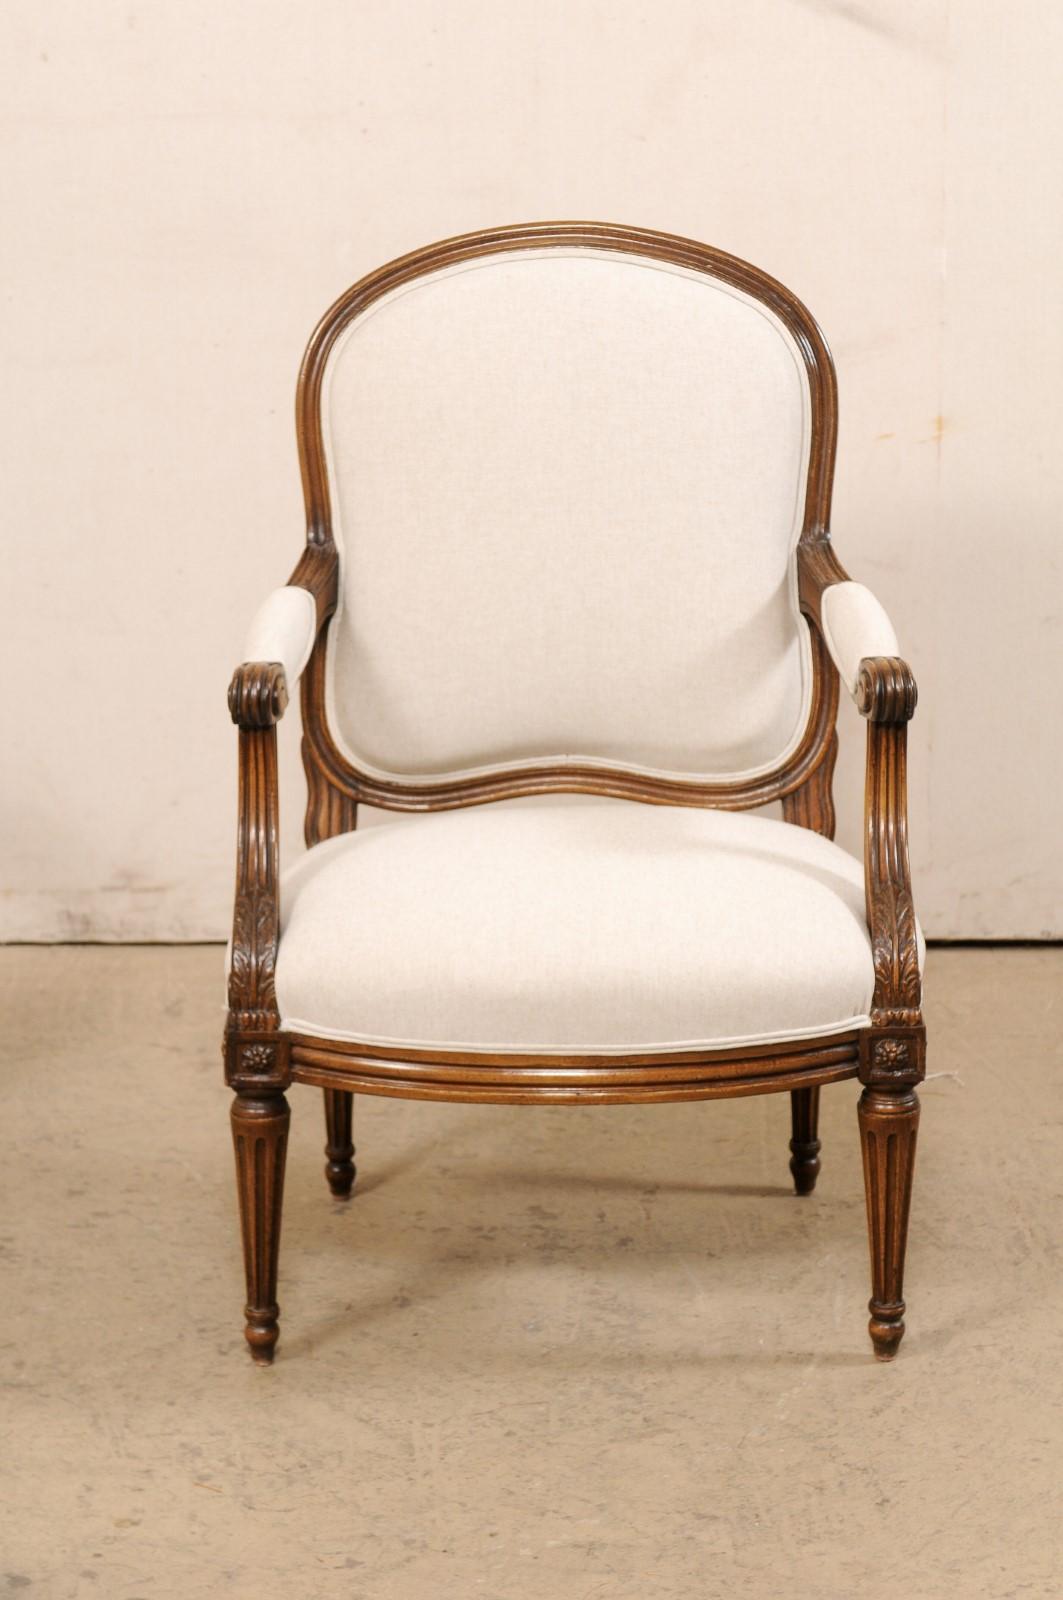 19th C. French Pair Carved-Wood Fauteuil Armchairs, Newly Upholstered in Linen In Good Condition For Sale In Atlanta, GA